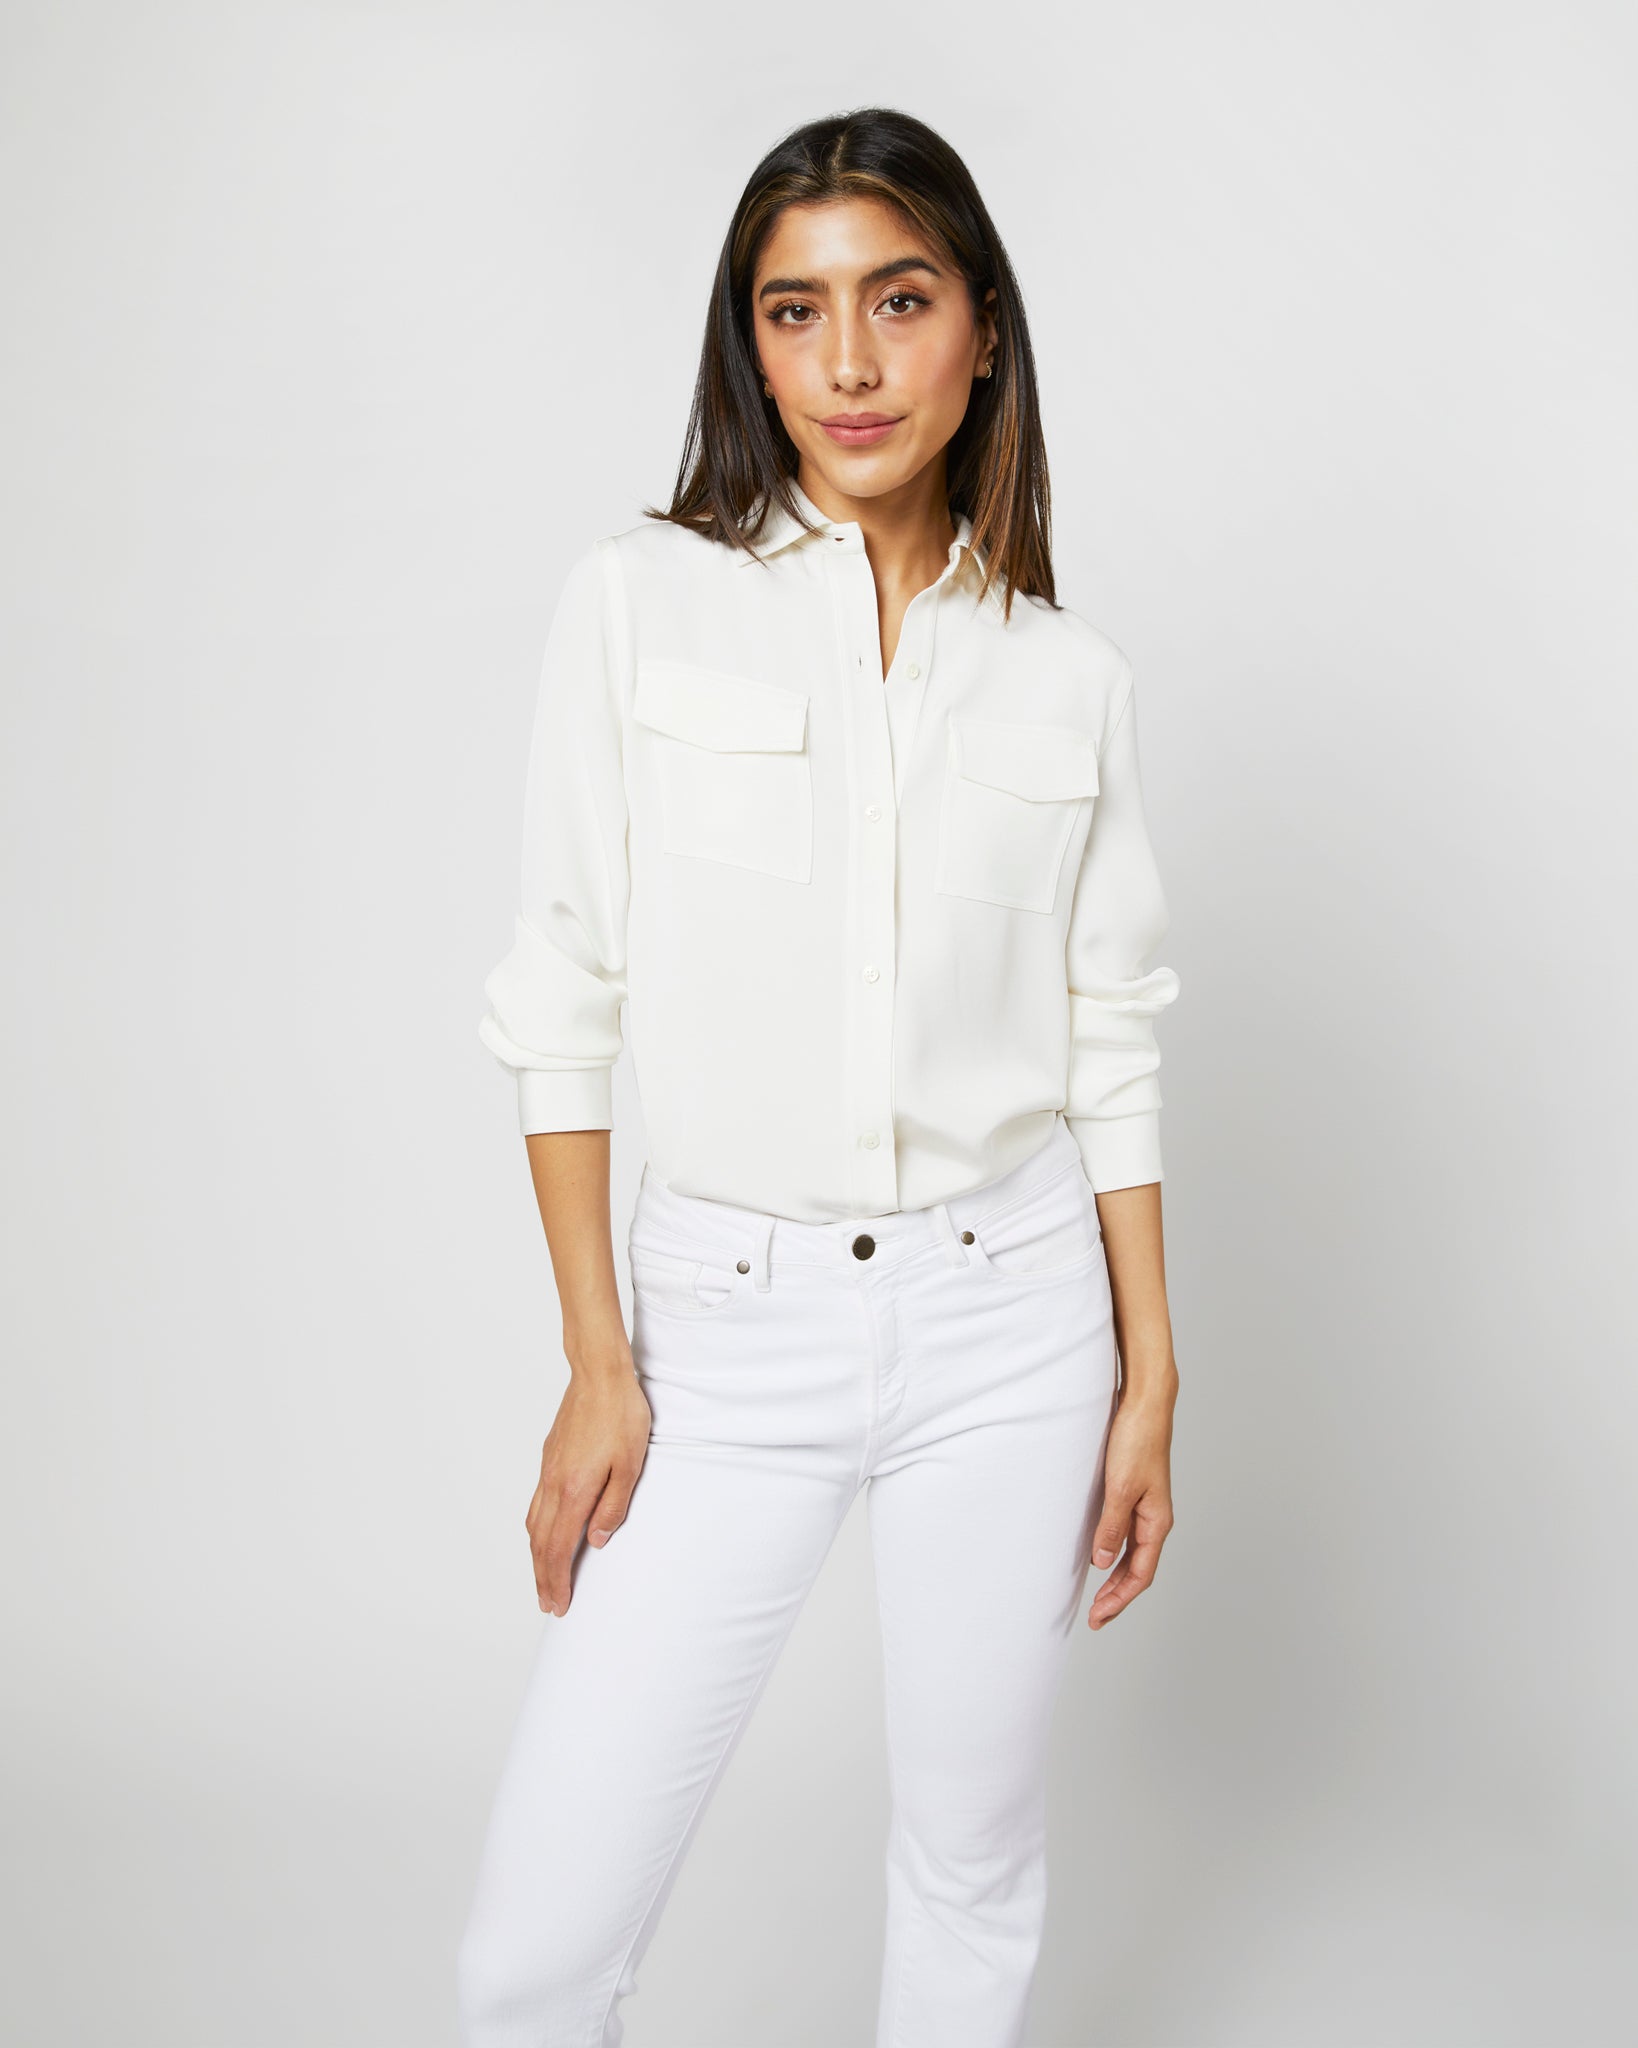 Hannah Blouse in Ivory Silk Crepe de Chine